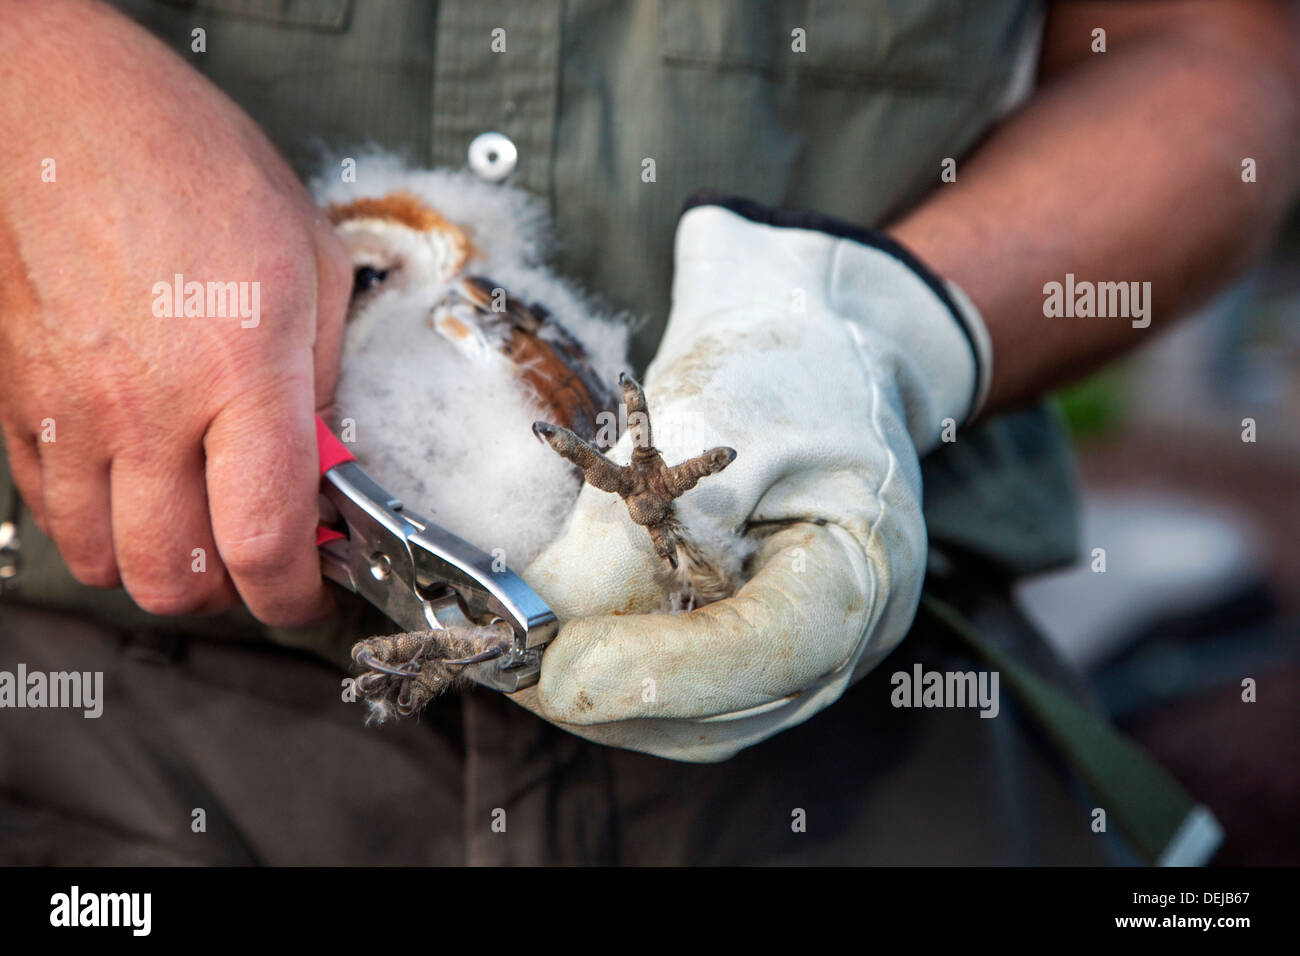 Bird ringer with pair of pincers and glove ringing Barn Owl (Tyto alba) owlet / chick with metal ring on leg for identification Stock Photo